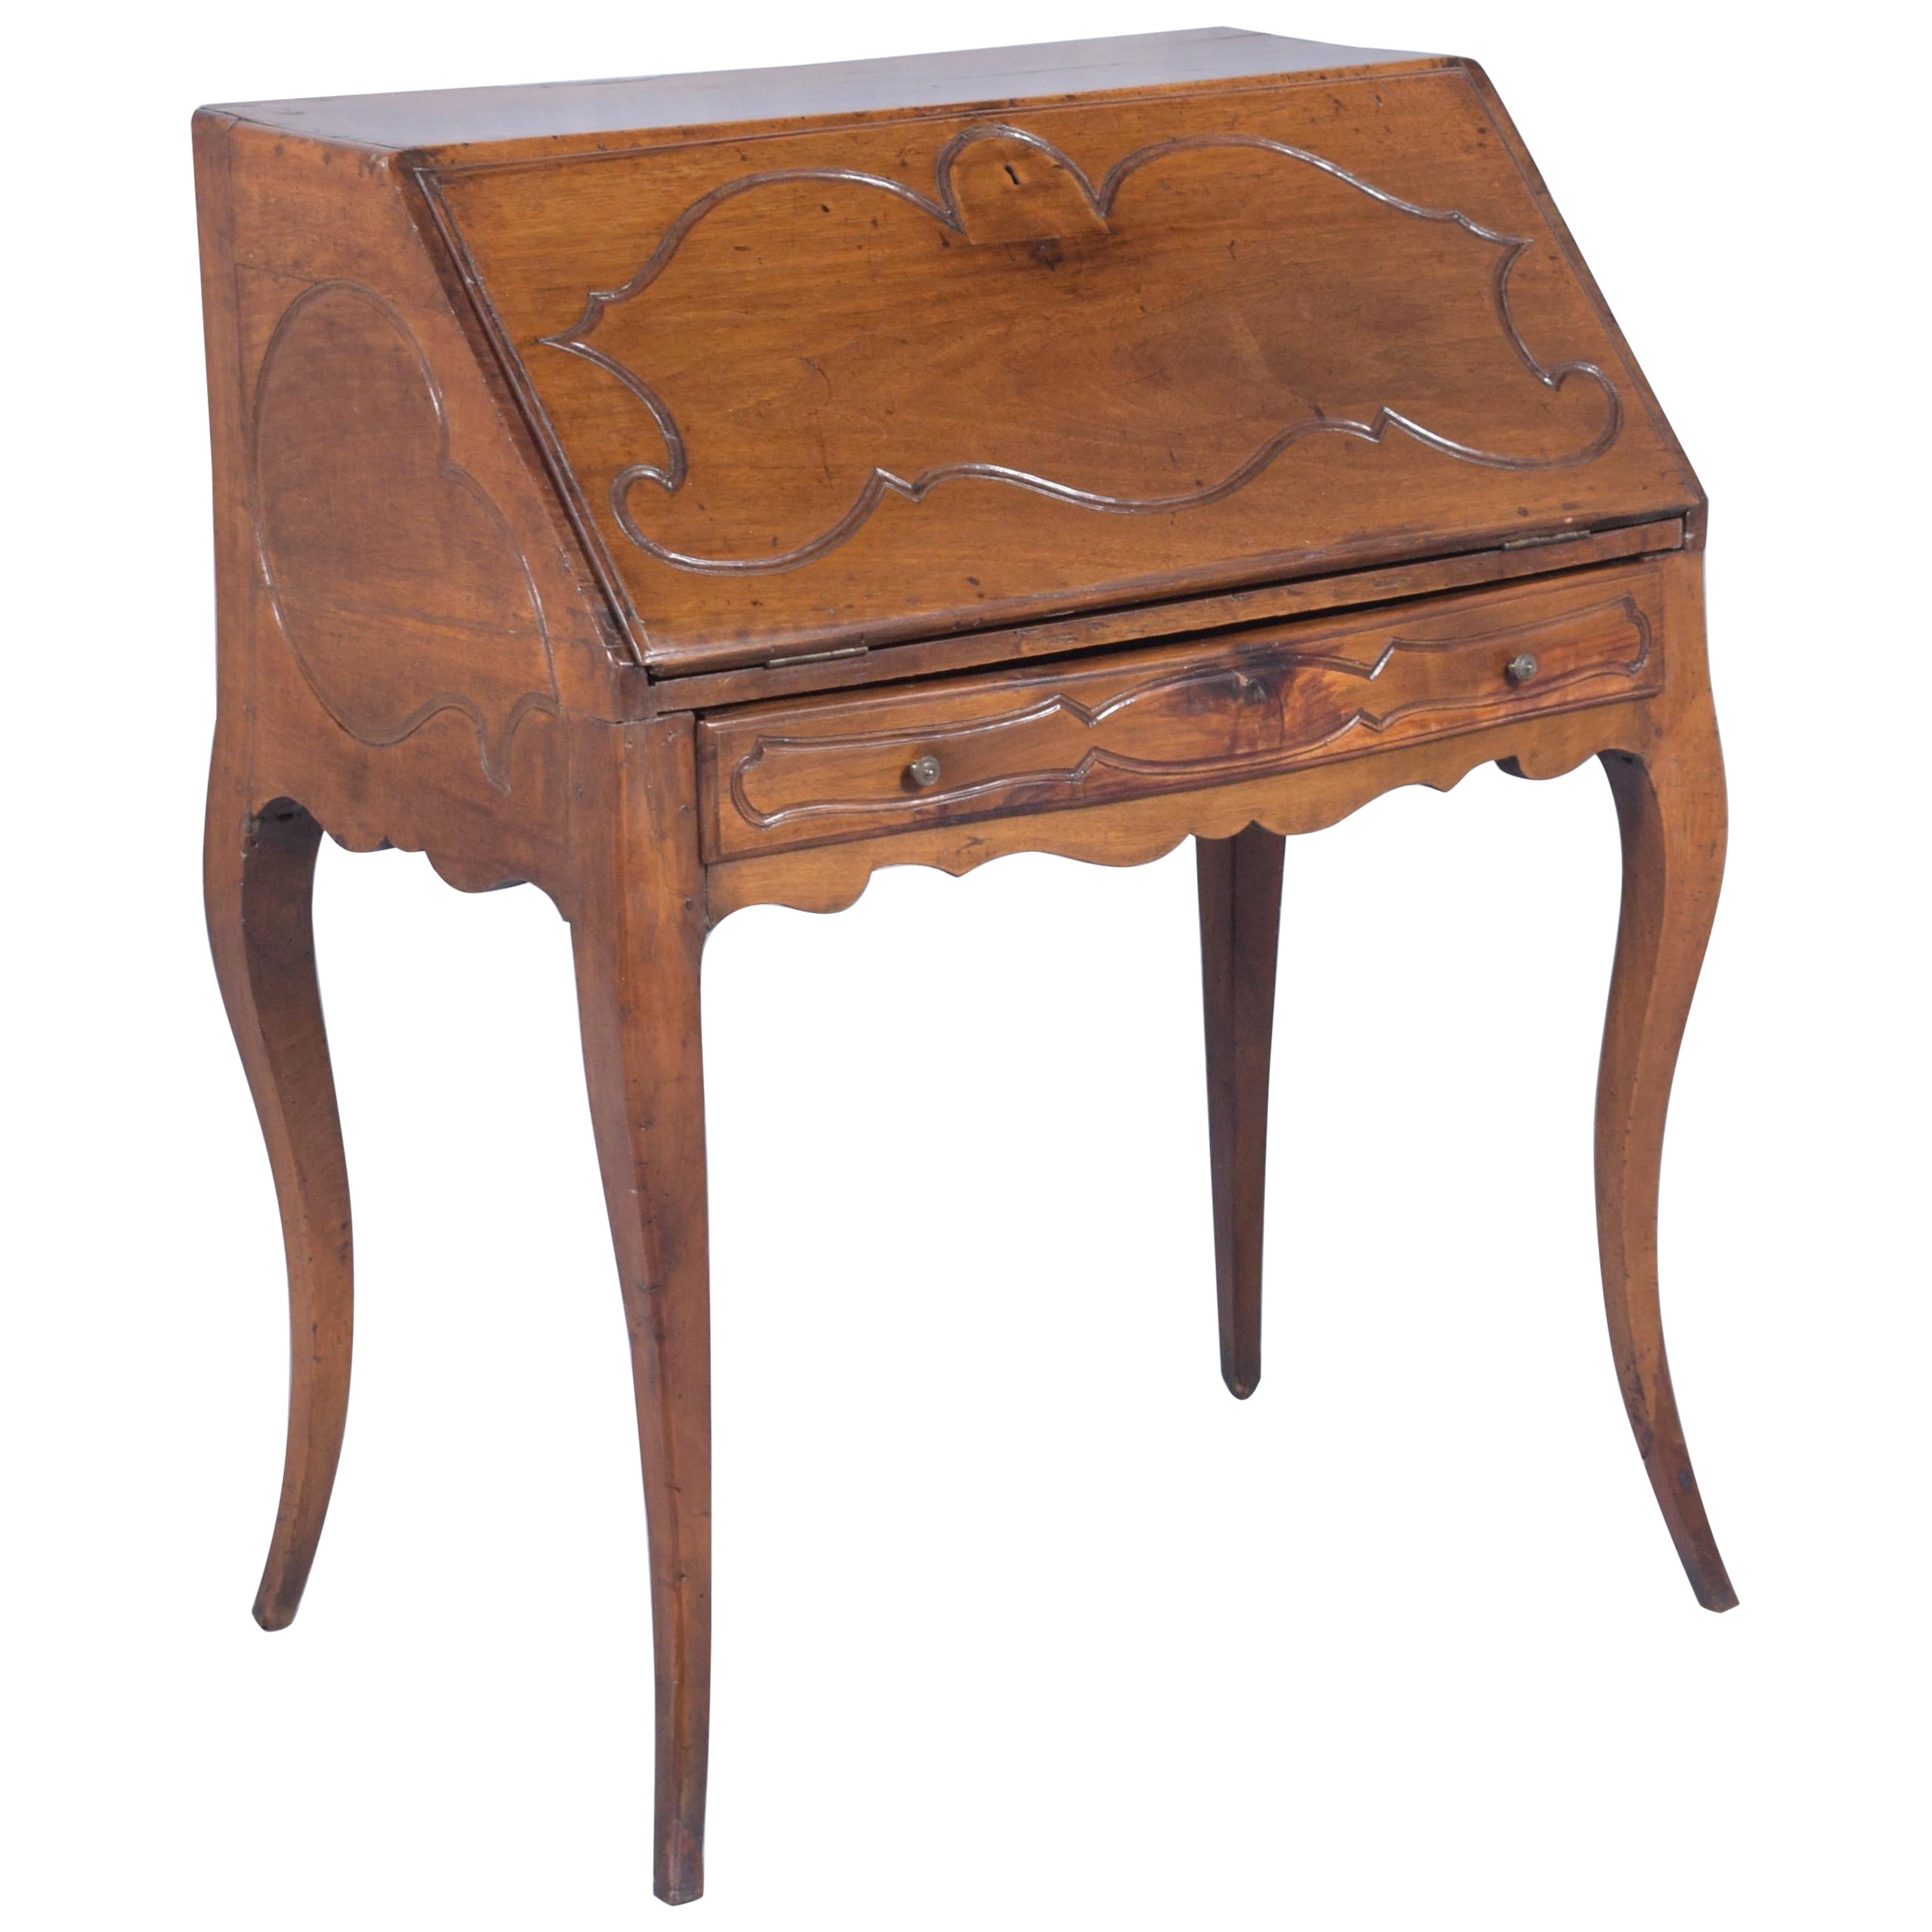 Restored Late 18th-Century French Antique Secrétaire with Intricate Carvings For Sale